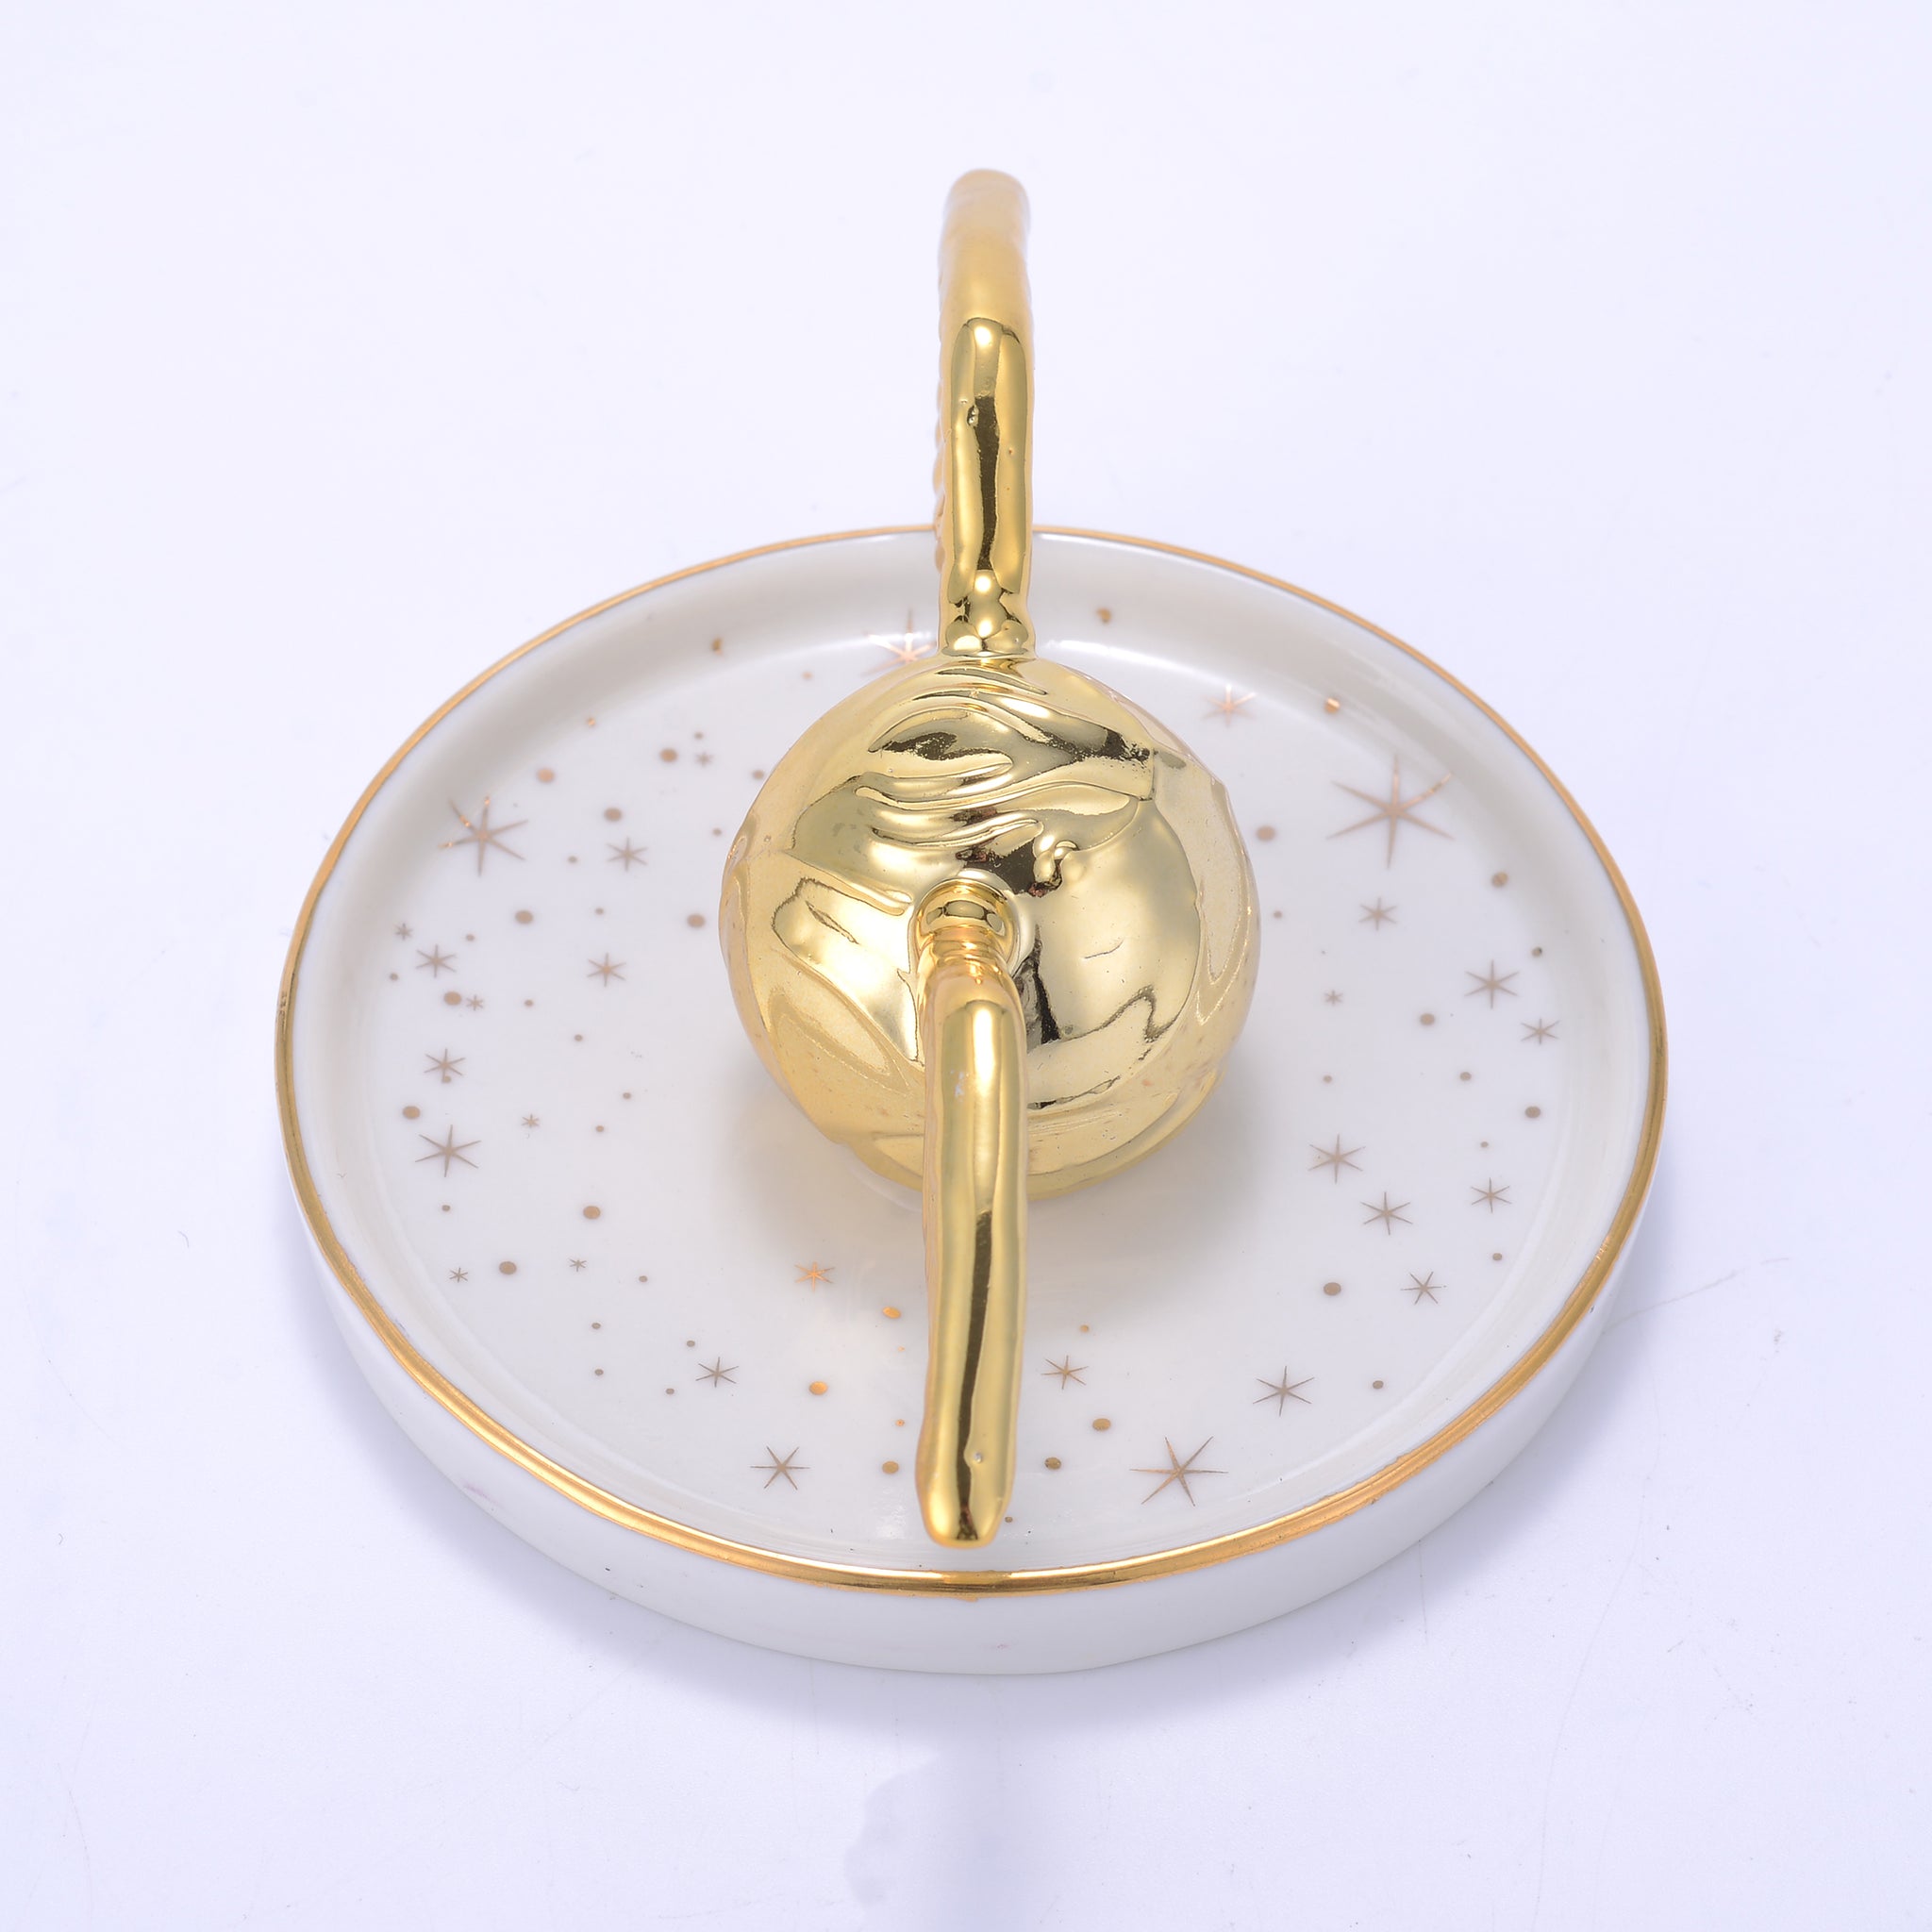 Ukonic Harry Potter Golden Snitch Ceramic Trinket Tray | 4 Inches